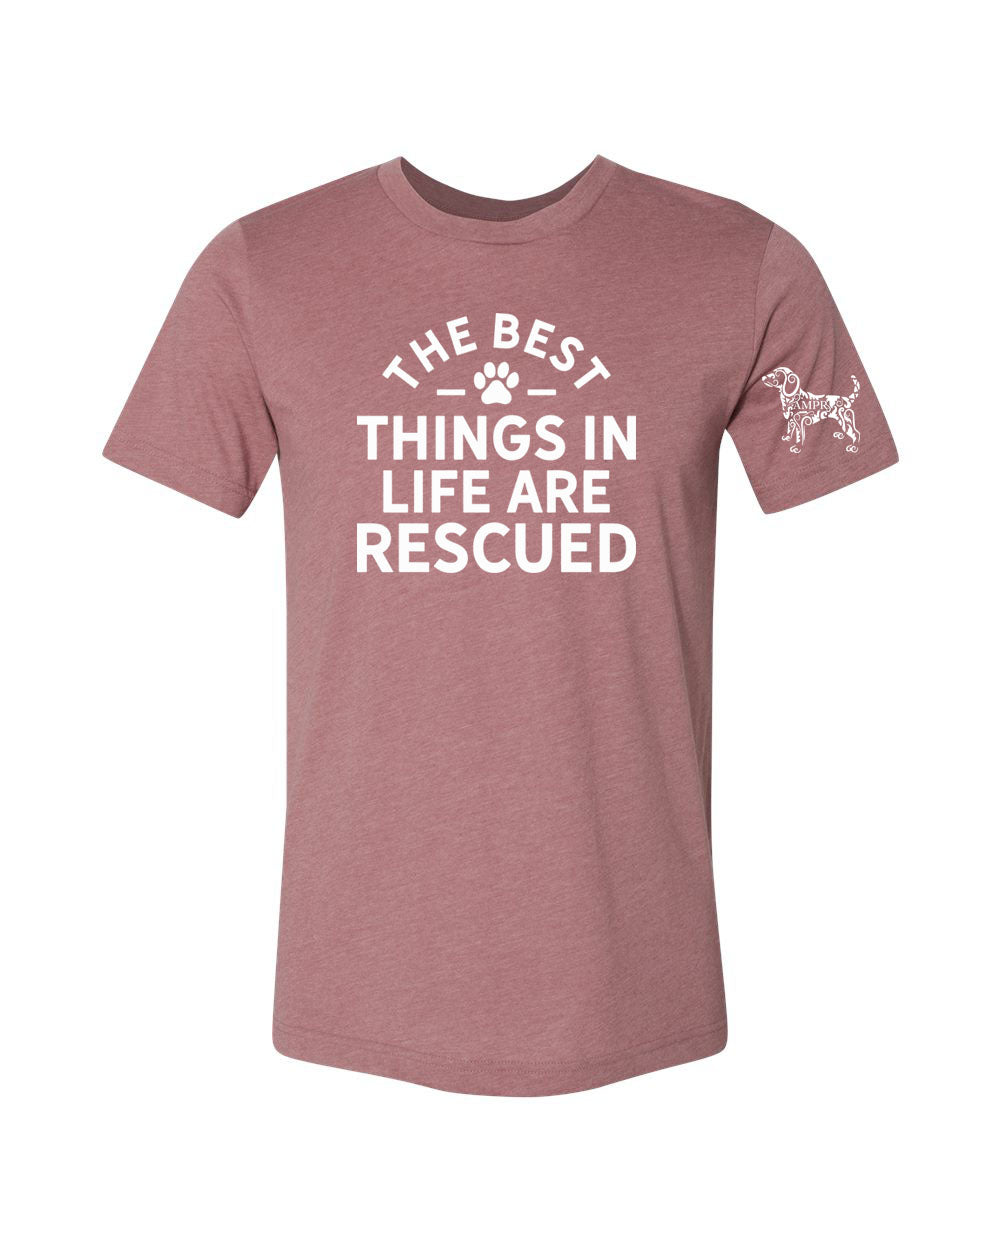 The best things in life are rescued t-Shirt